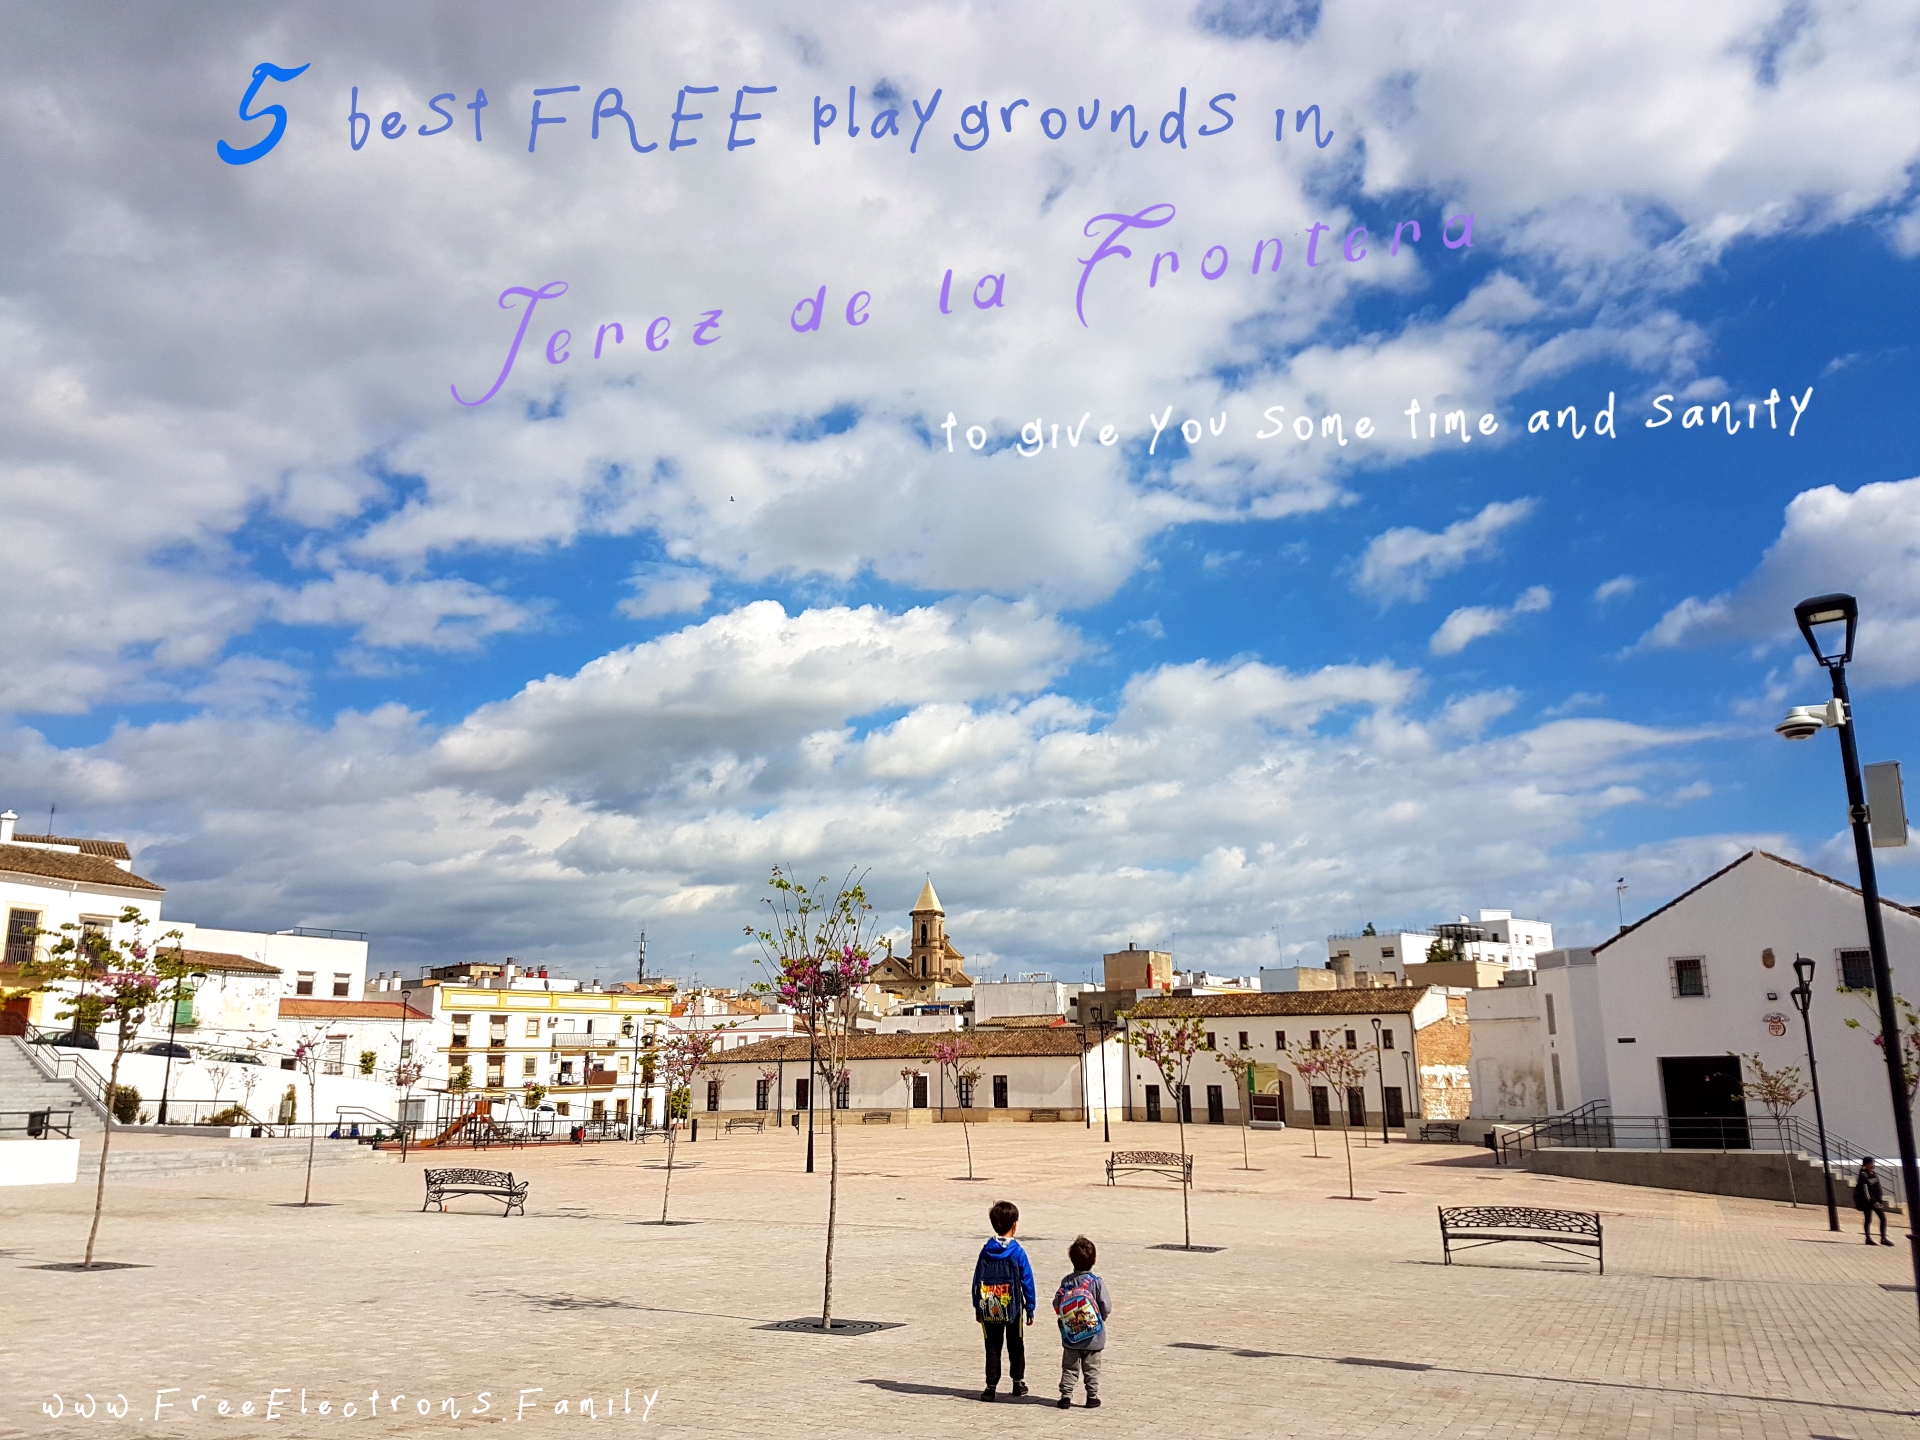 5 best FREE playground in Jerez de la Frontera to give you some time and sanity.  PIN IT PLEASE!

www.FreeElectrons.Family.